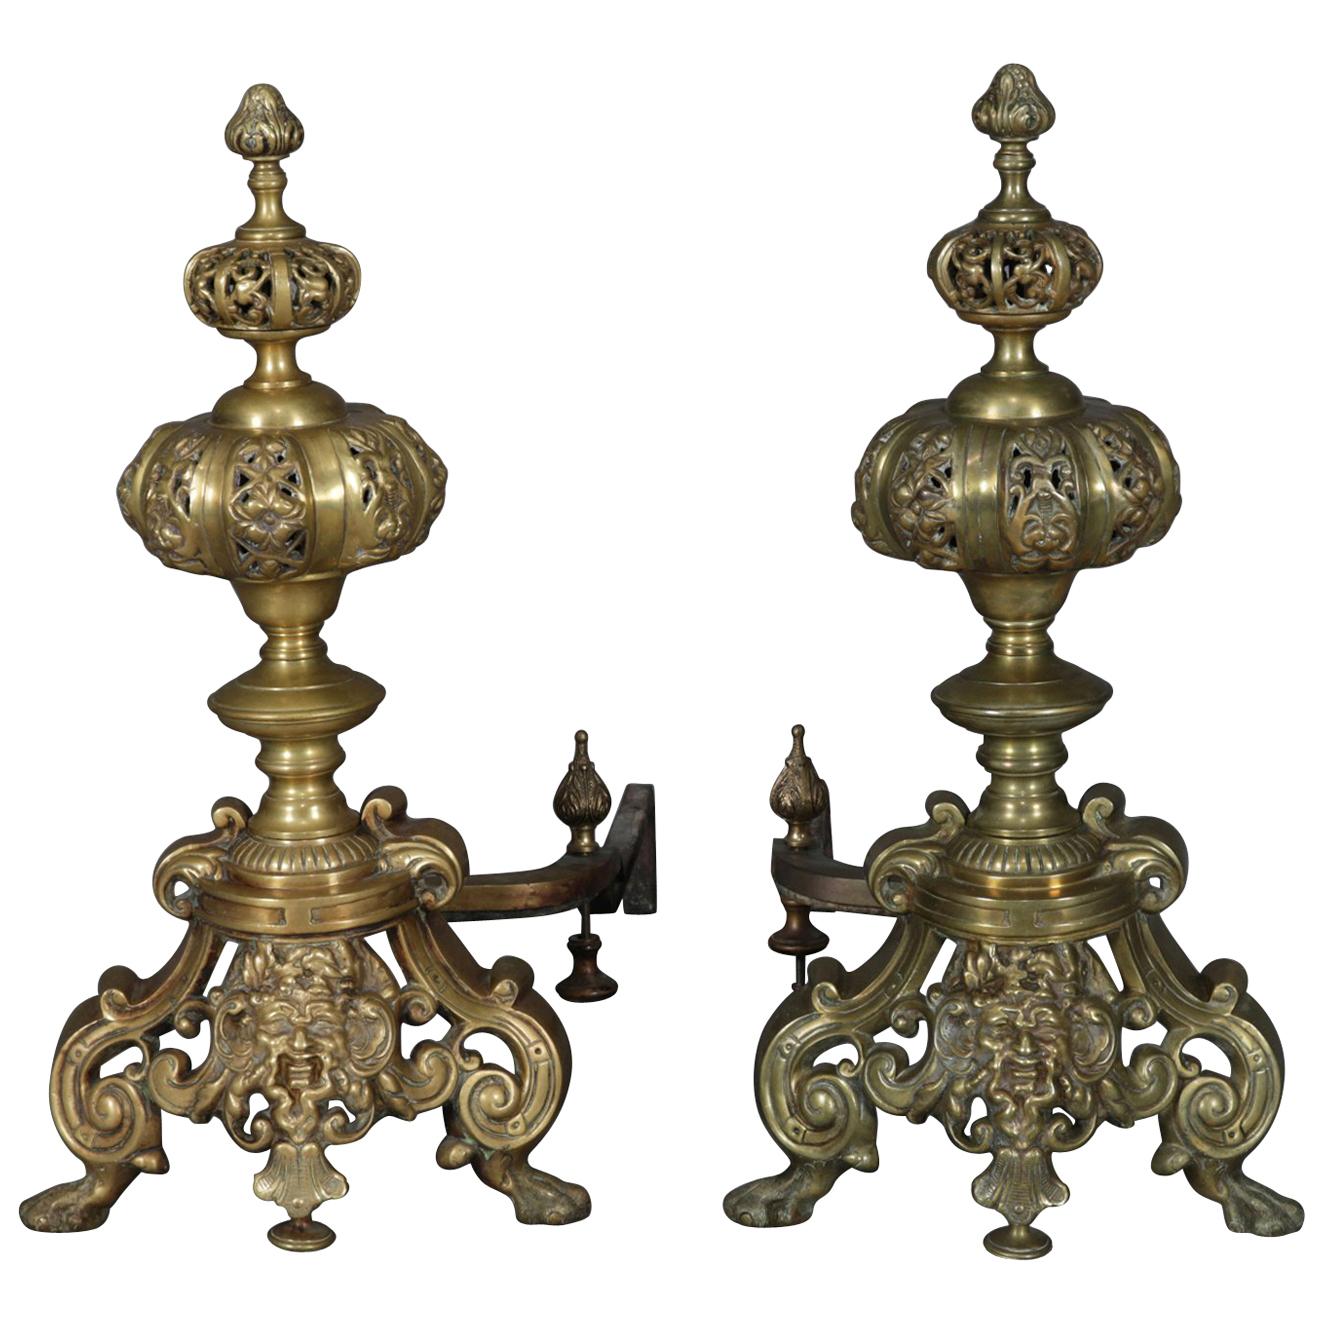 Pair of Oversized French Baroque Brass Fireplace Chenet Andirons with Masks